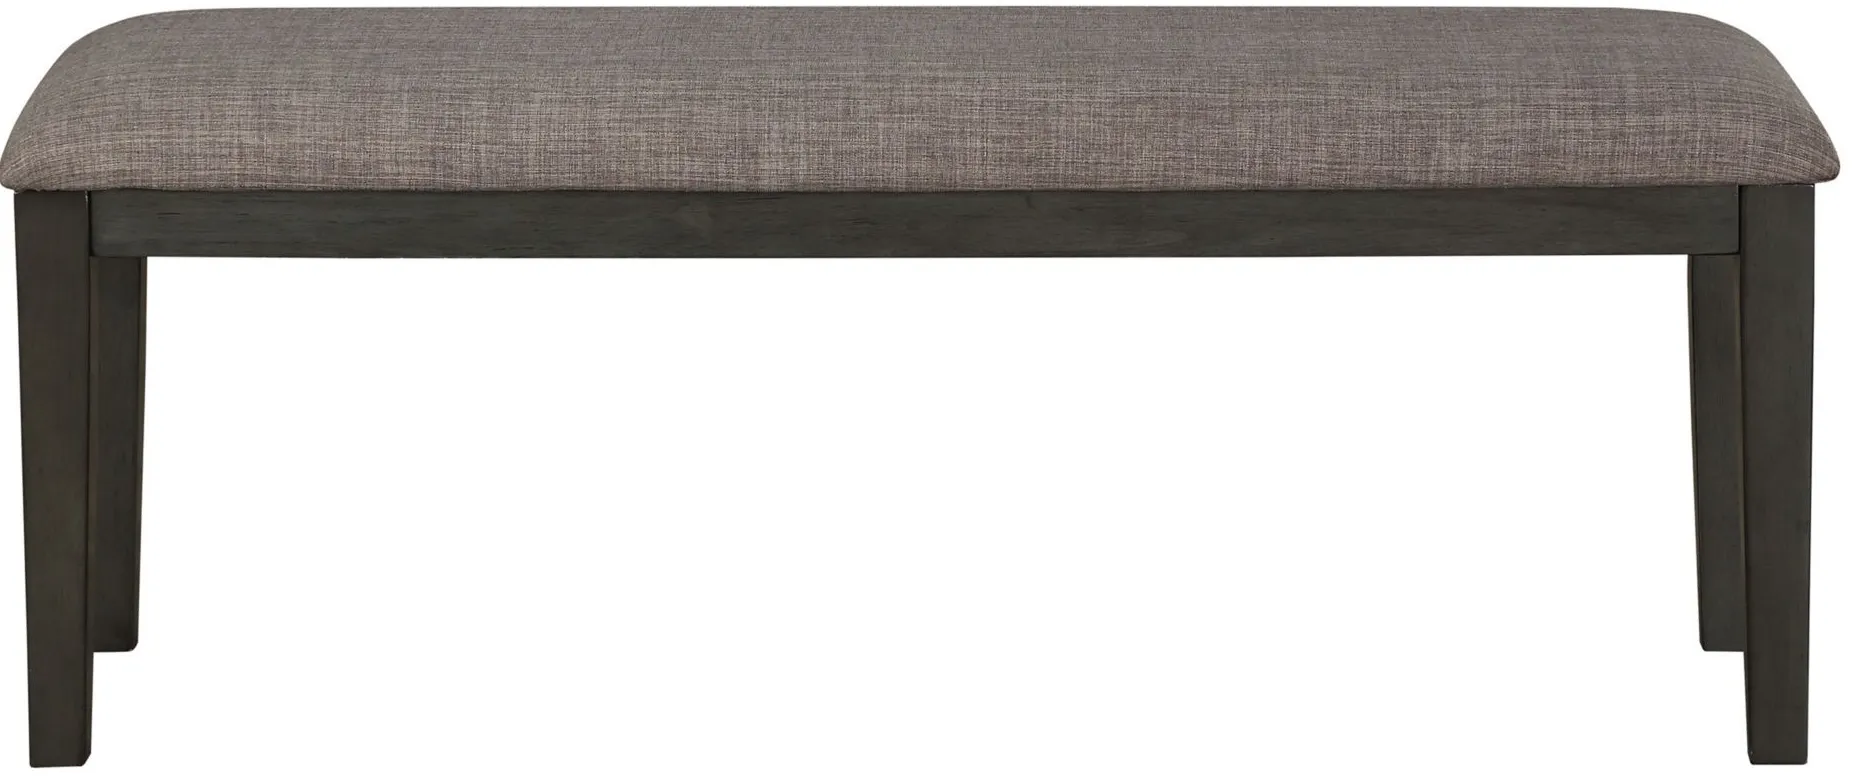 Brindle Dining Room Bench in Gray by Homelegance